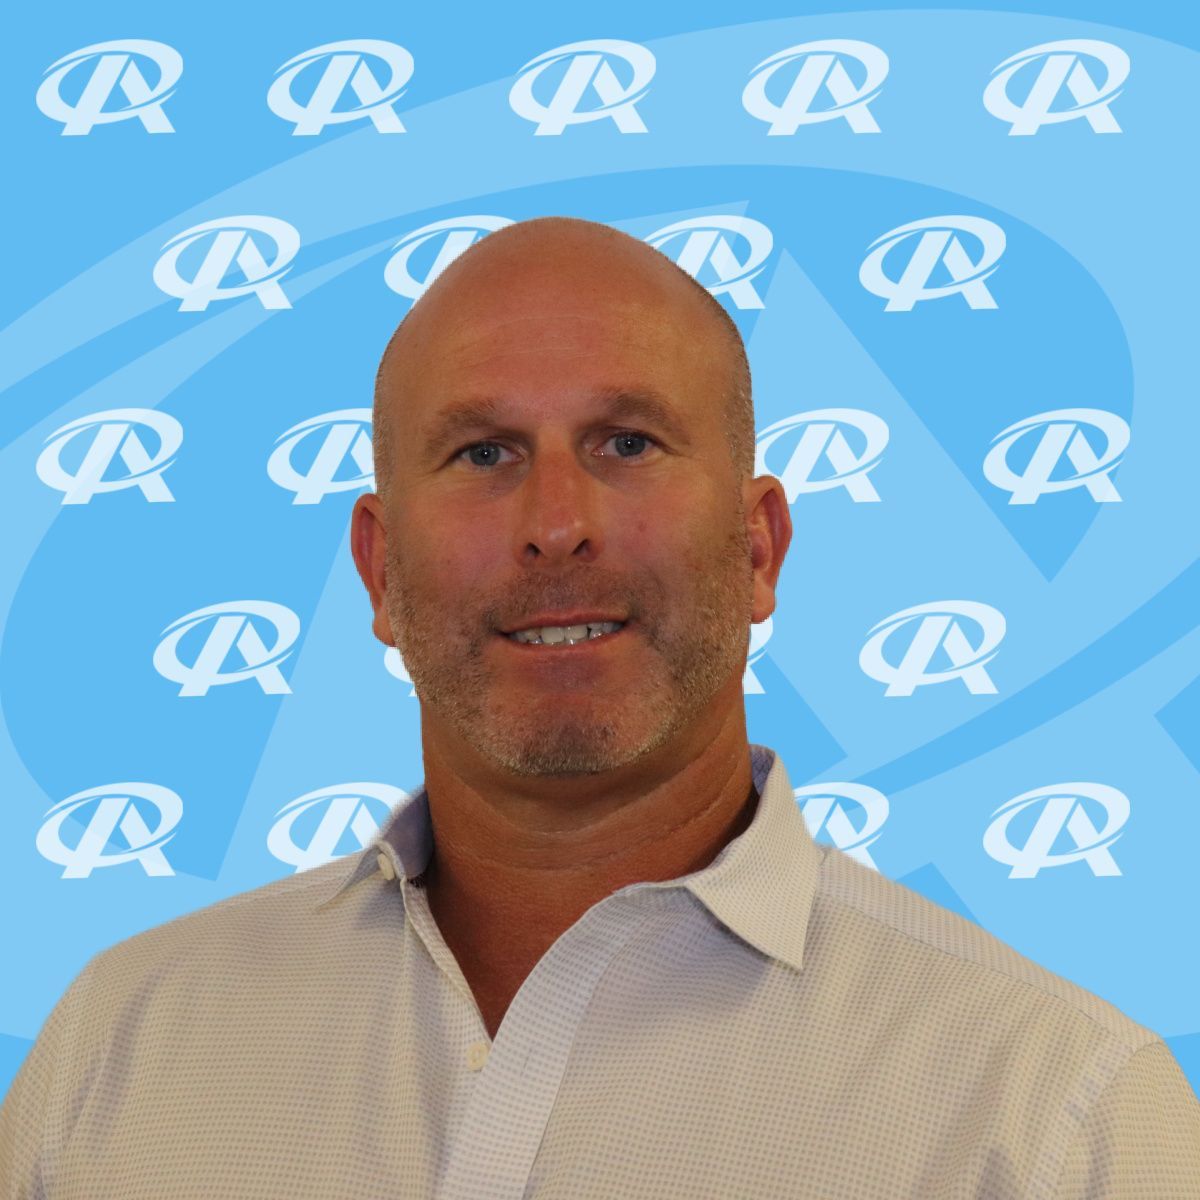 A bald man is smiling in front of a blue background with the letter r on it